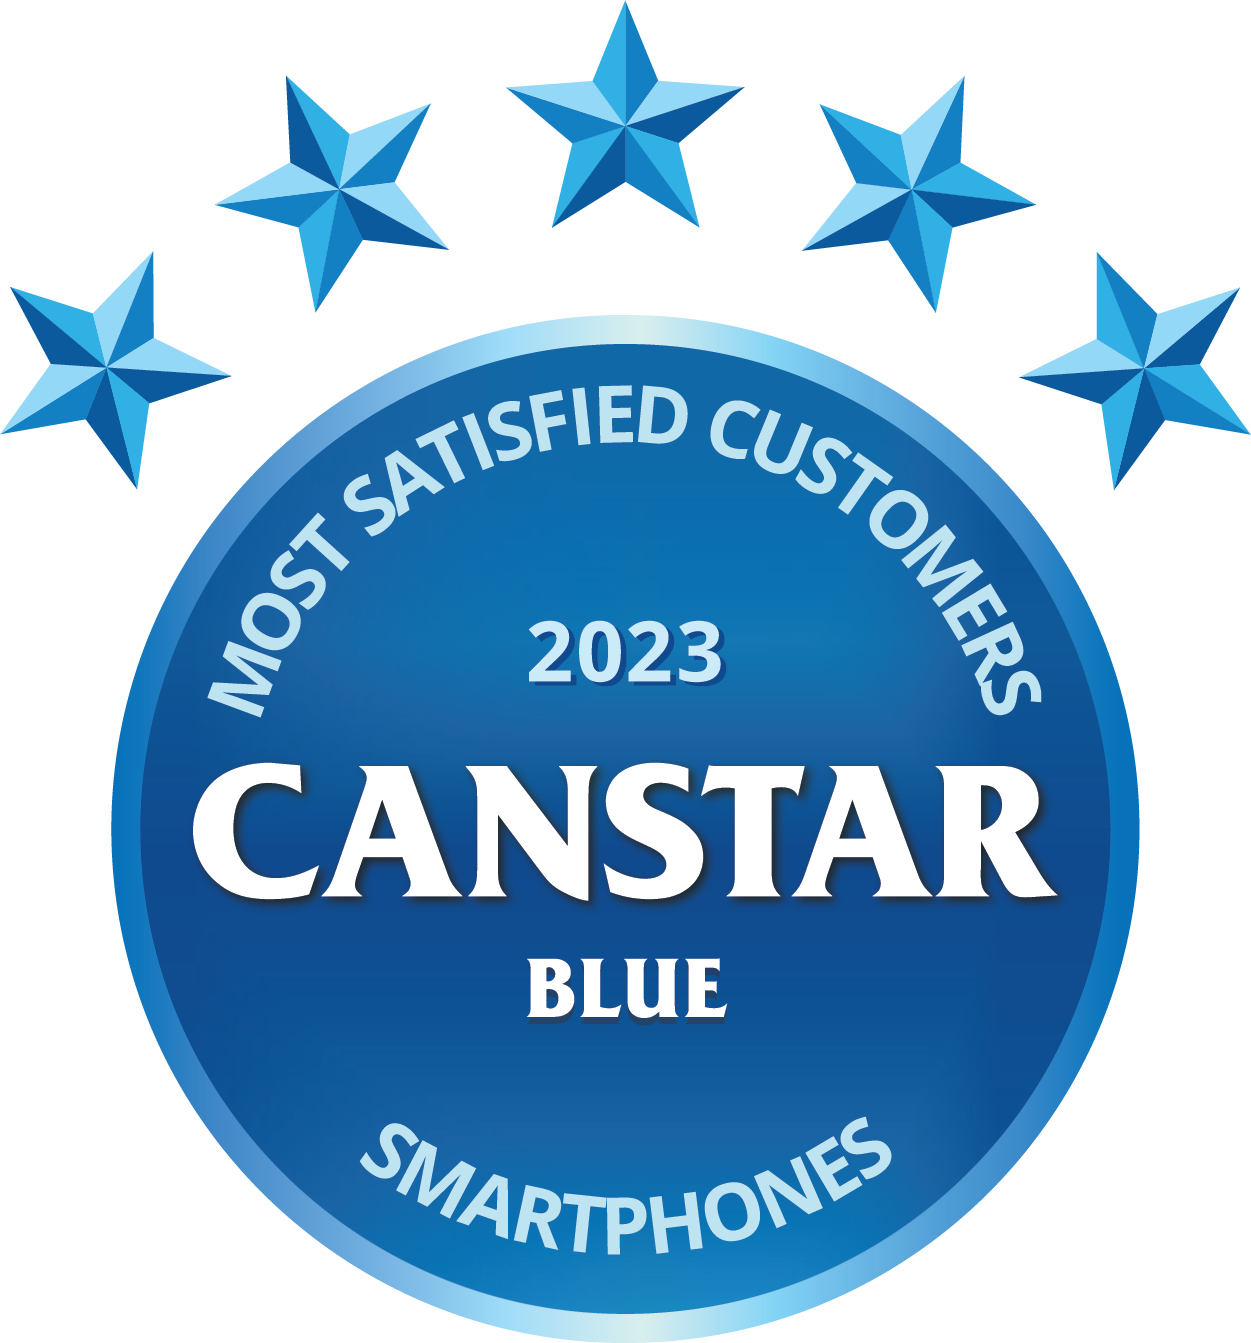 Canstar Blue’s Satisfied Customer Award Smartphones – Samsung has been awarded top spot in Canstar Blue’s 2023 smartphone ratings, scoring an impressive five stars across all categories including overall satisfaction.